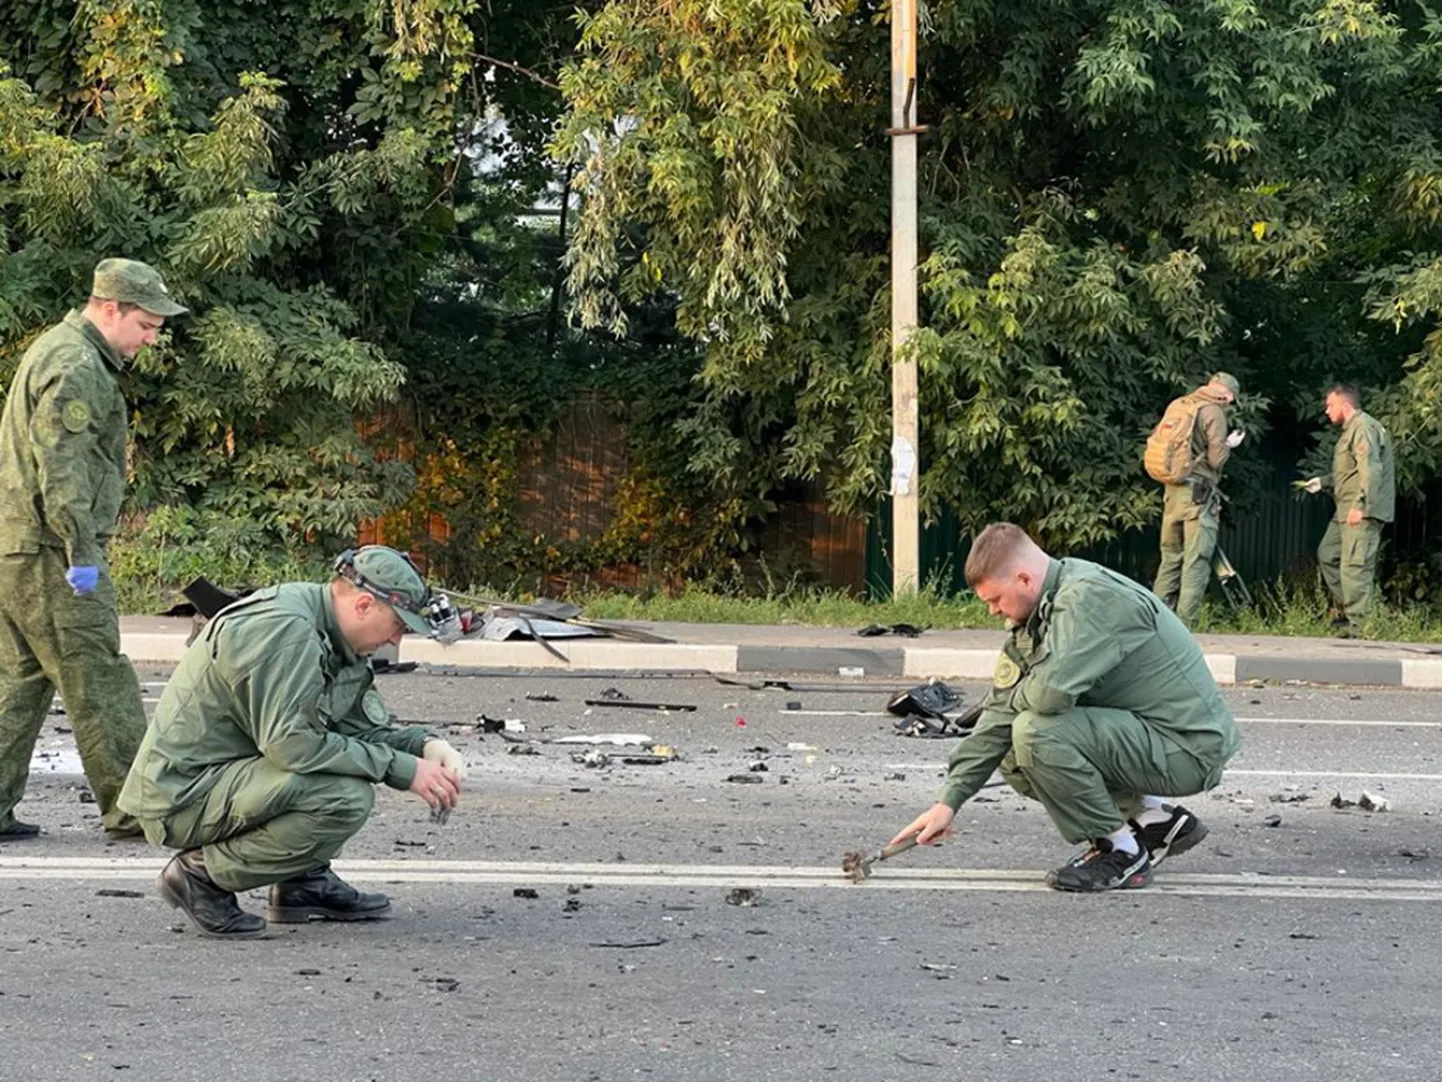 Investigators working at the scene of a car explosion on Mozhaisk highway near the village of Bolshiye Vyazemi in the Odintsovo urban district in Moscow region, Russia. In the evening of 20 August a Toyota Land Cruiser car blew up when the car was moving at full speed on a highway, and then burned. The driver Darya Dugina, the daughter of the philosopher Alexander Dugin, died on the spot.